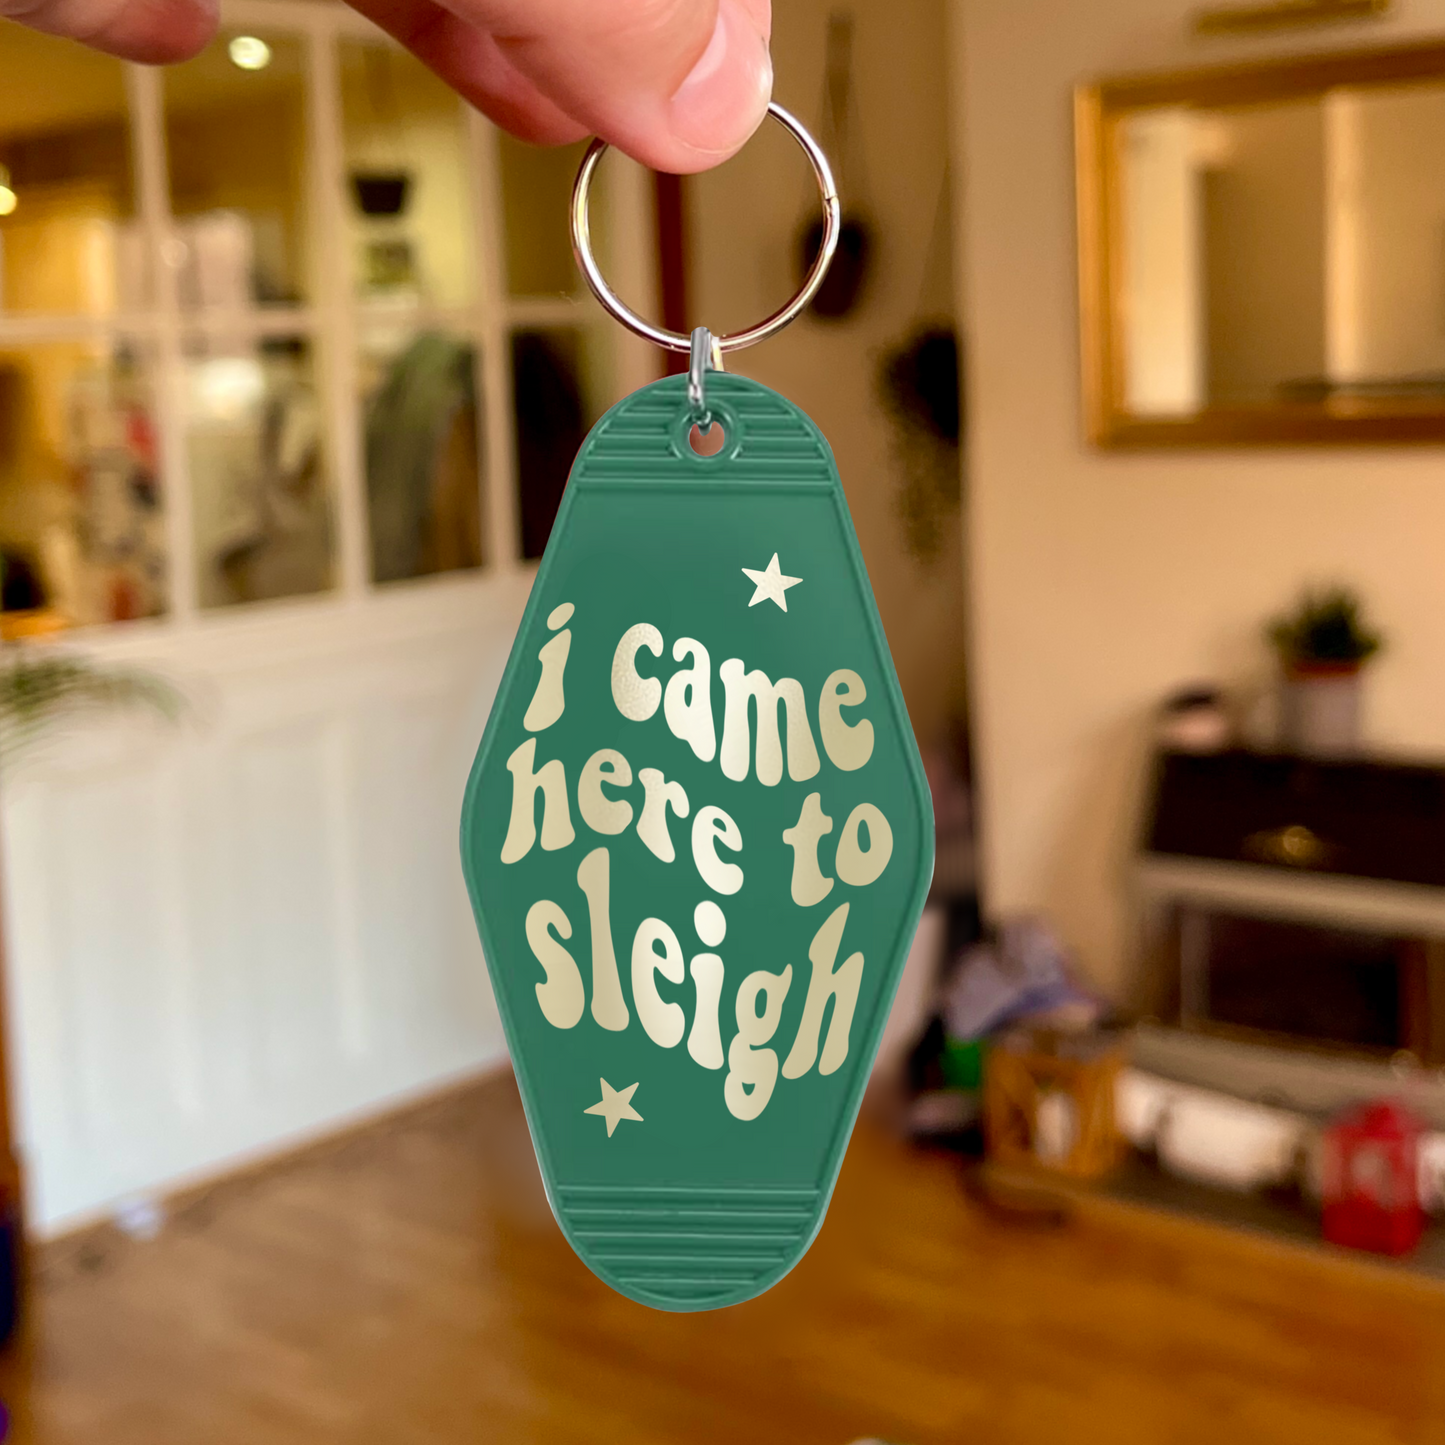 Came Here to Sleigh Keychain | A Very Merry Birch Studios Christmas